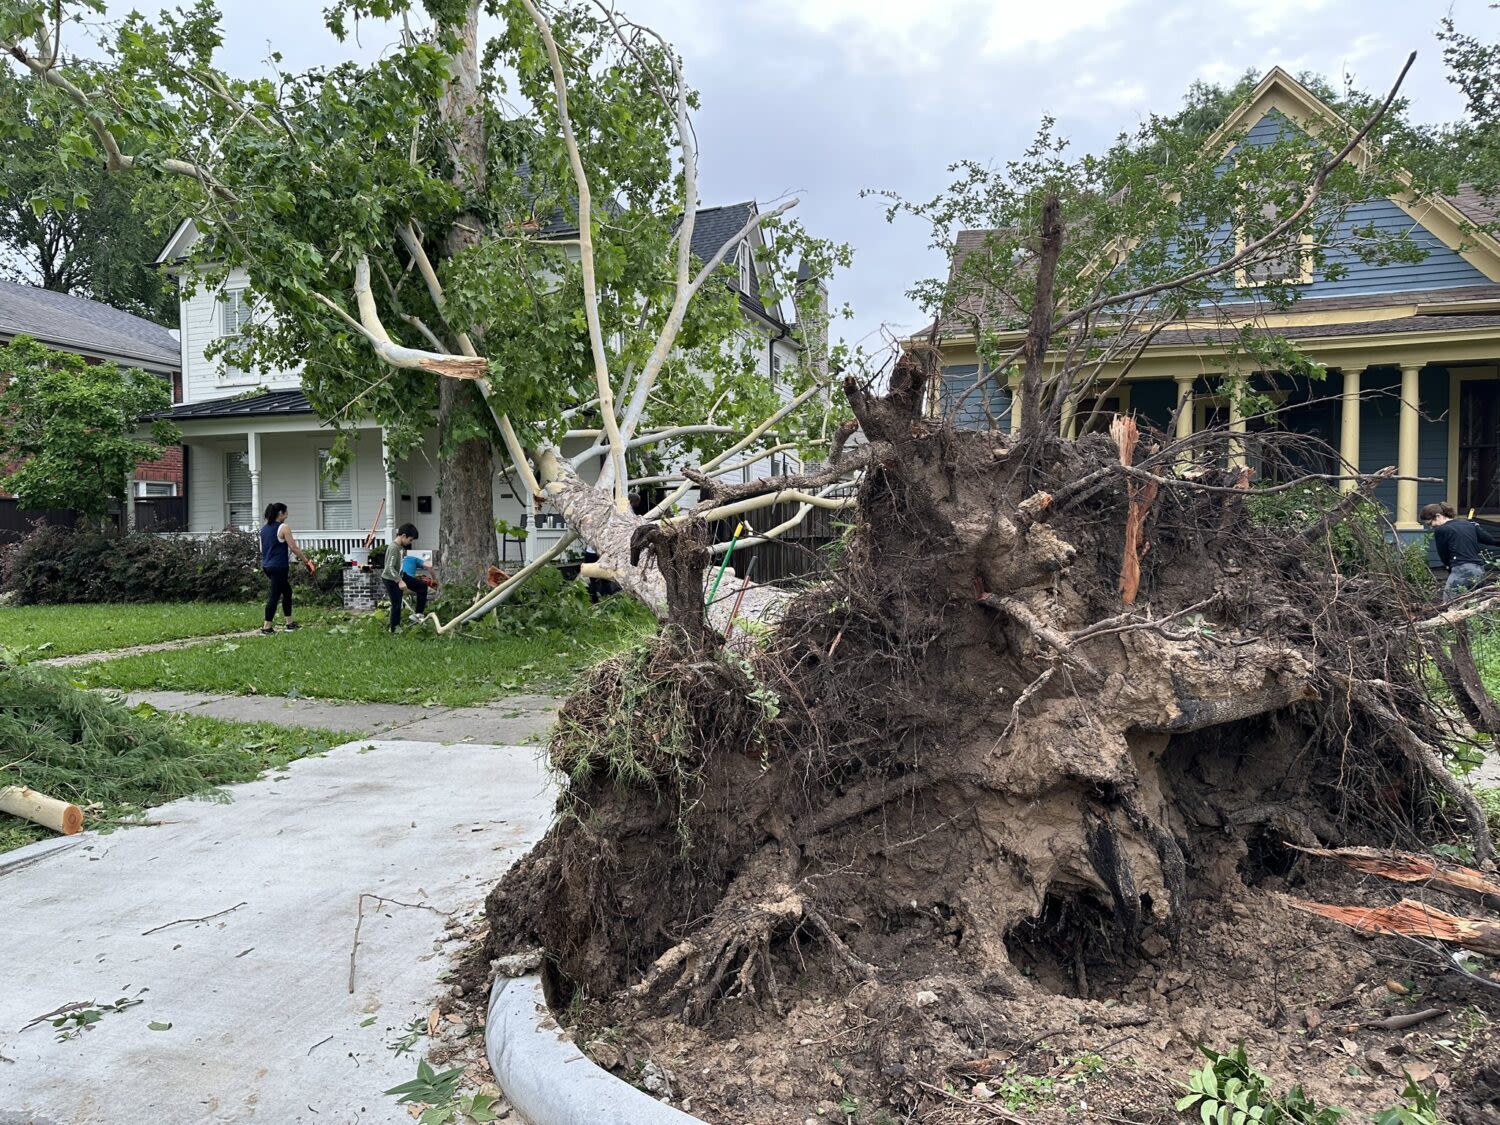 Houston-area residents share accounts of fast-developing severe storms | Houston Public Media